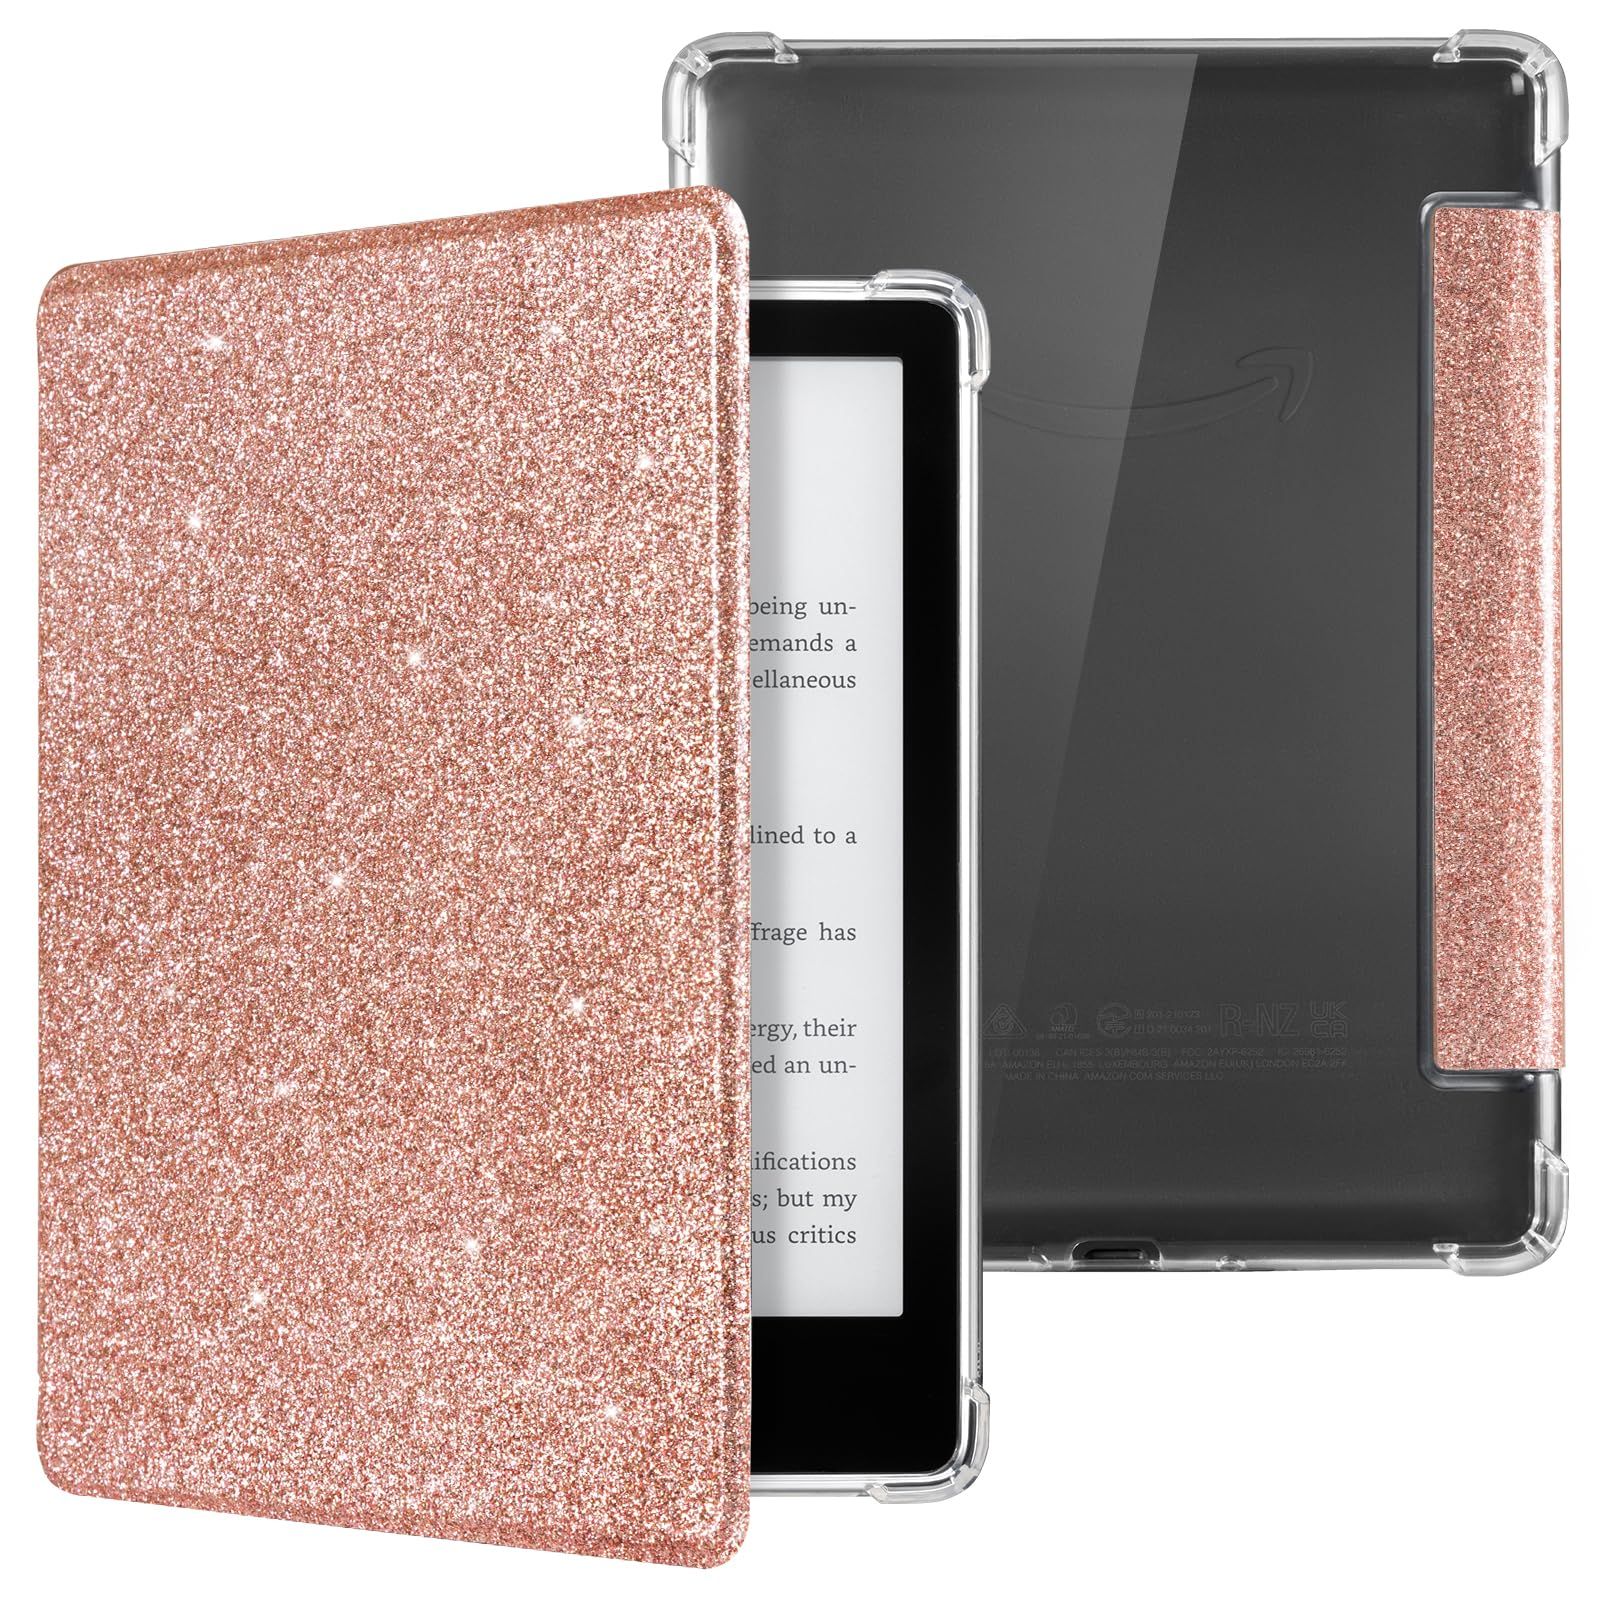 CoBak Case for Kindle Paperwhite - New PU Leather Cover and Clear Soft Silicone Back Cover with A... | Amazon (US)